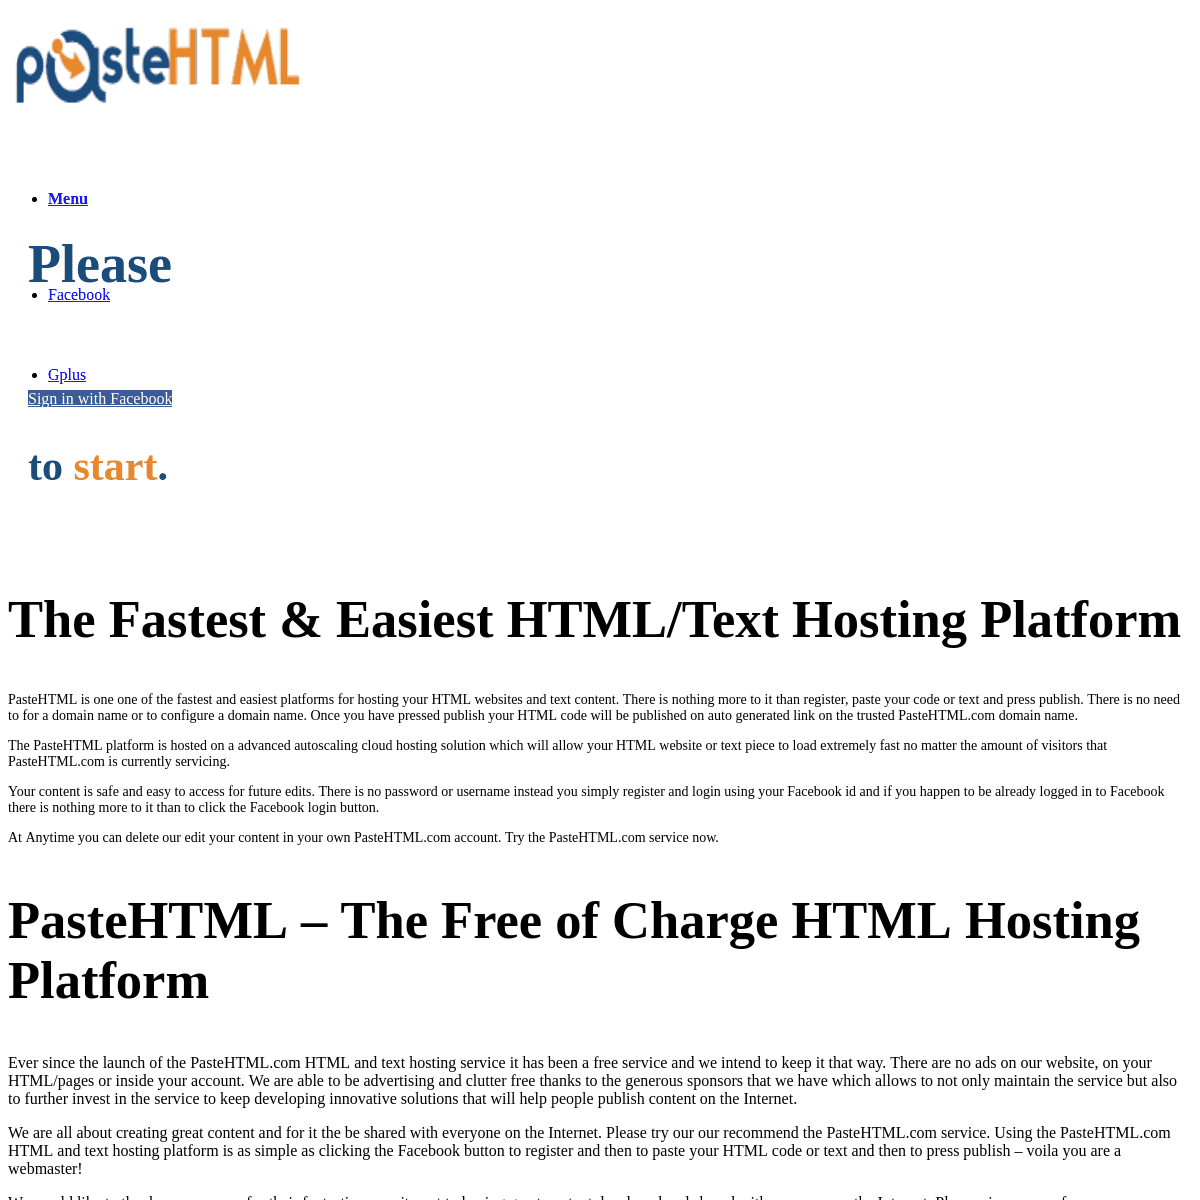 The fastest & easiest HTML/TEXT hosting platfrom | 2019